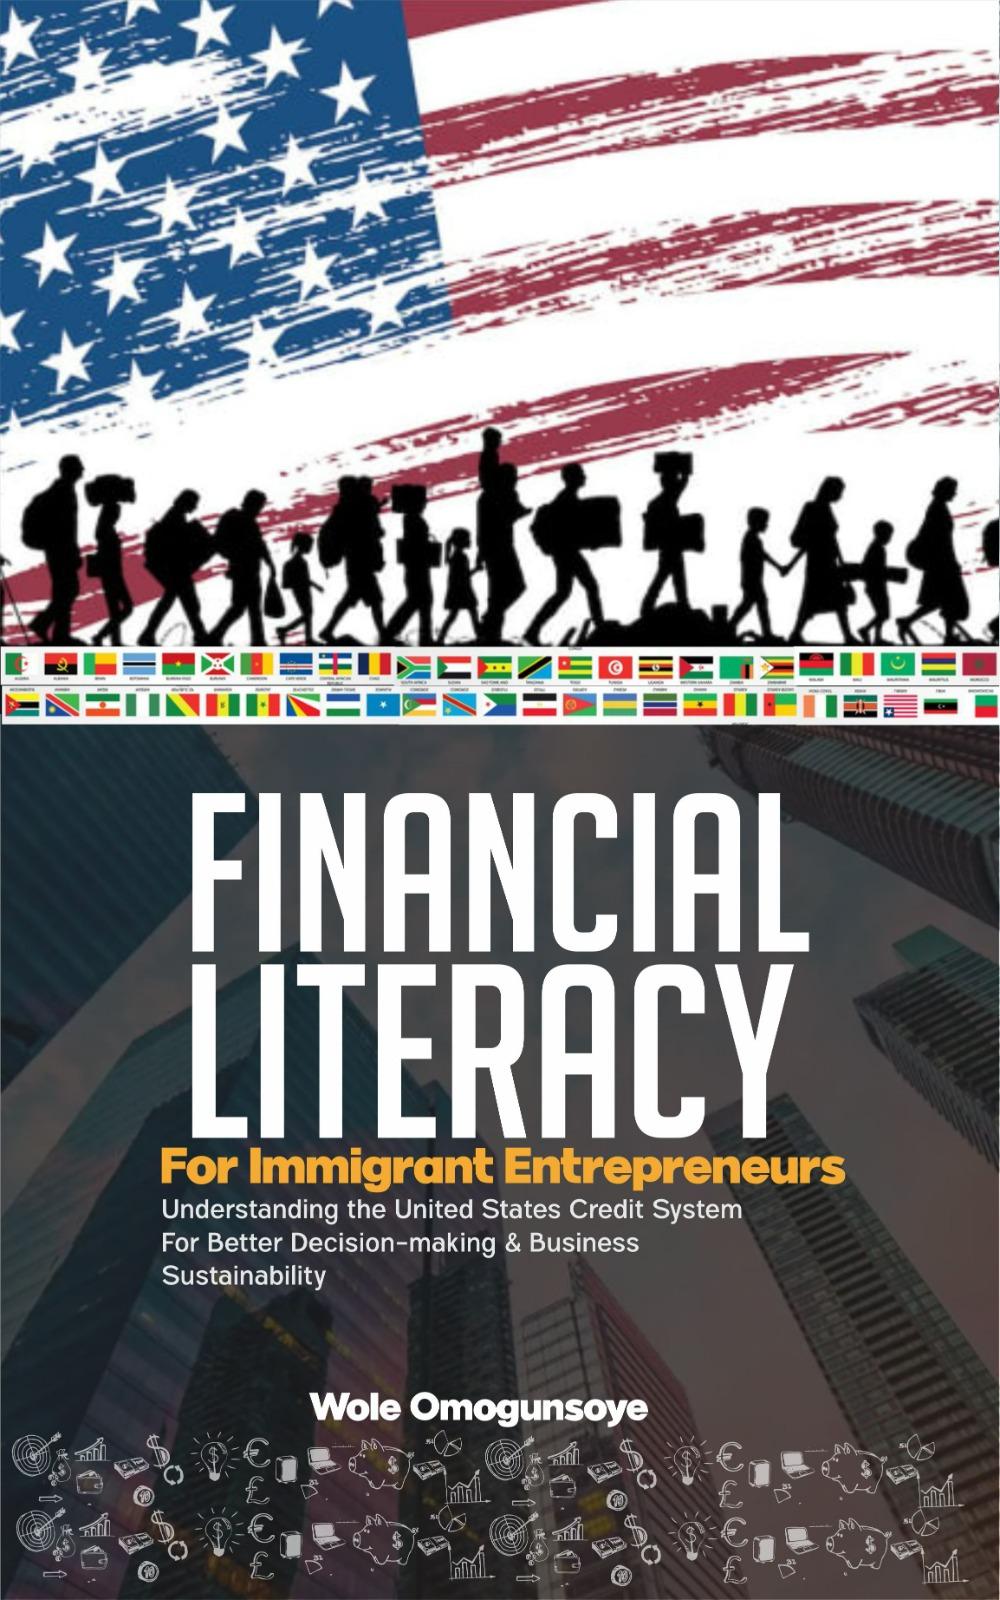 You are currently viewing Wole Omogunsoye launches book on financial literacy and American credit system